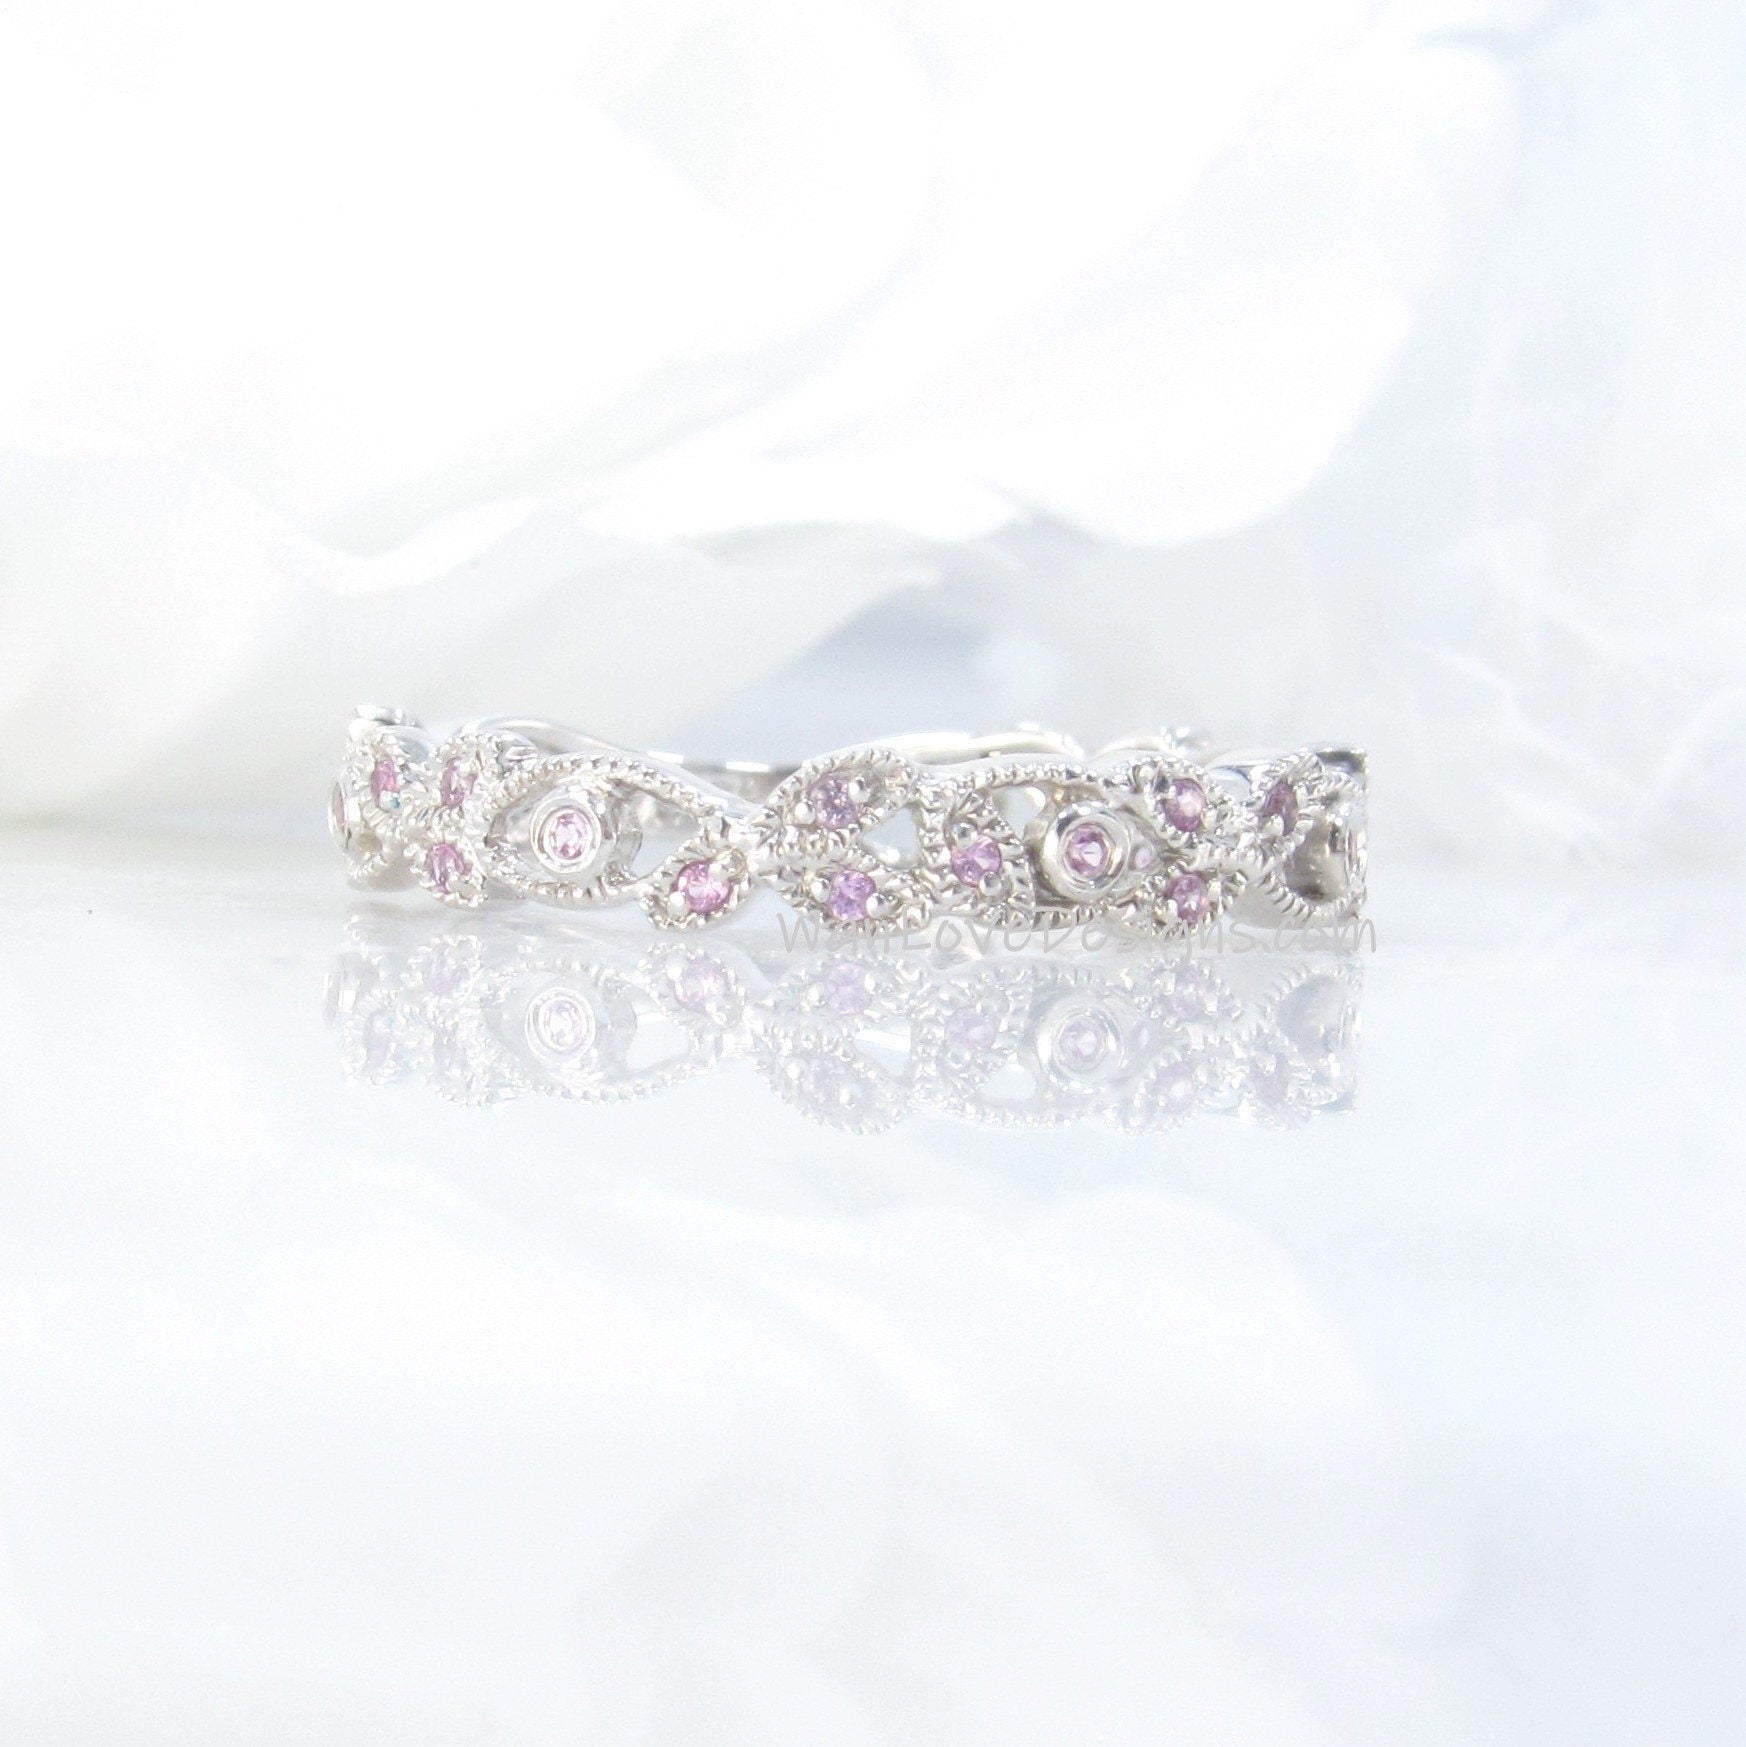 Sample Sale Ready to ship-Pink Sapphire Milgrain leaf Almost Eternity Wedding Band Stacking Ring Silver Rhodium Anniversary Gift round Wan Love Designs